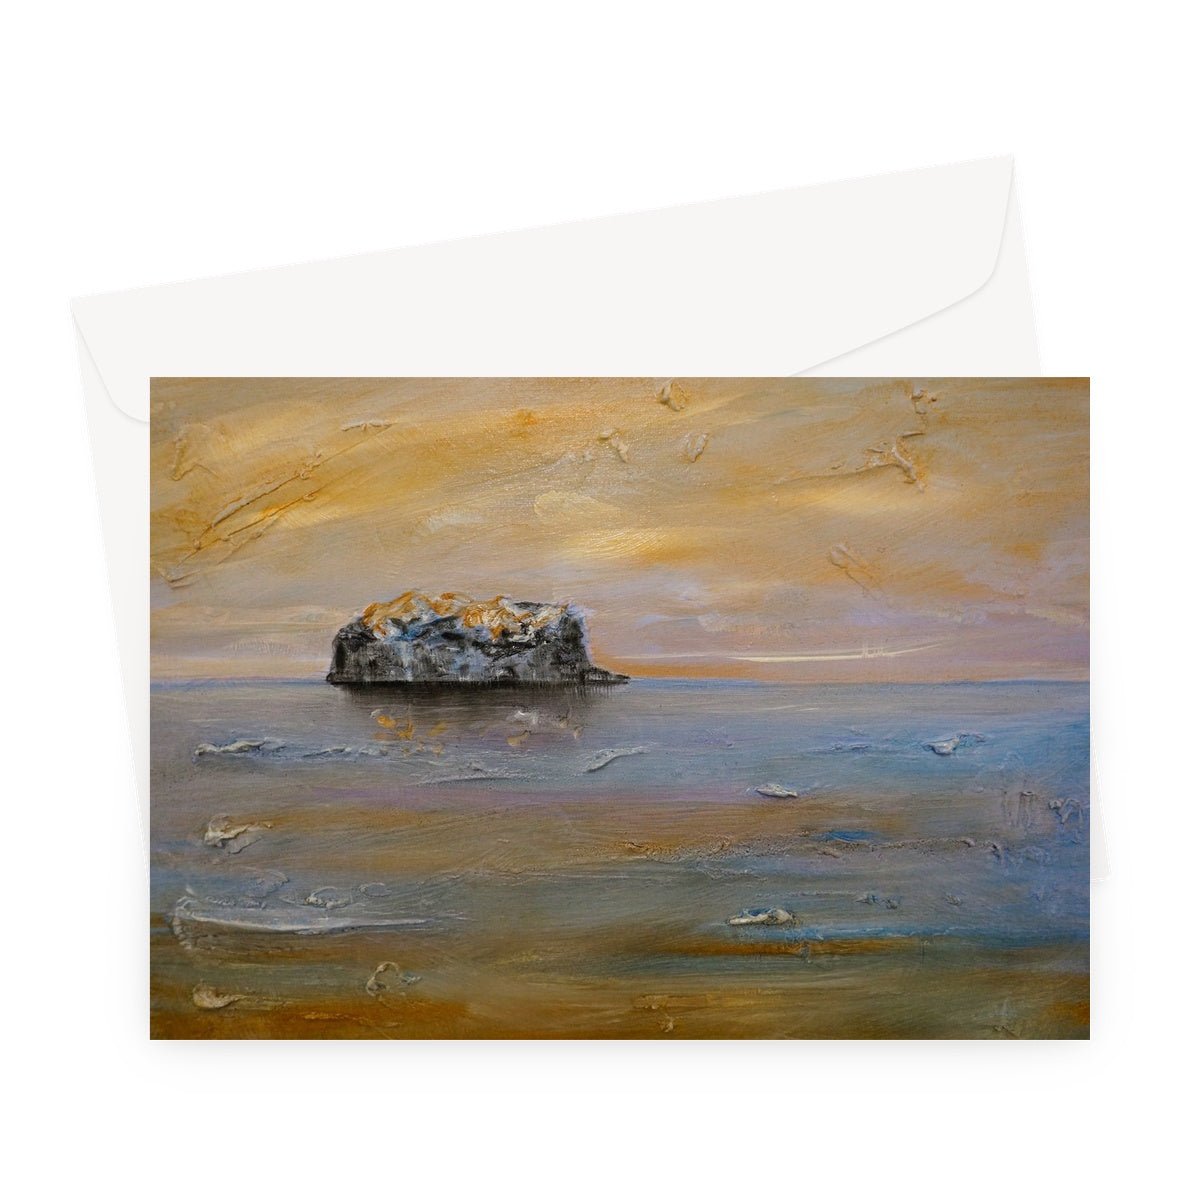 Bass Rock Dawn Art Gifts Greeting Card-Greetings Cards-Edinburgh & Glasgow Art Gallery-A5 Landscape-1 Card-Paintings, Prints, Homeware, Art Gifts From Scotland By Scottish Artist Kevin Hunter